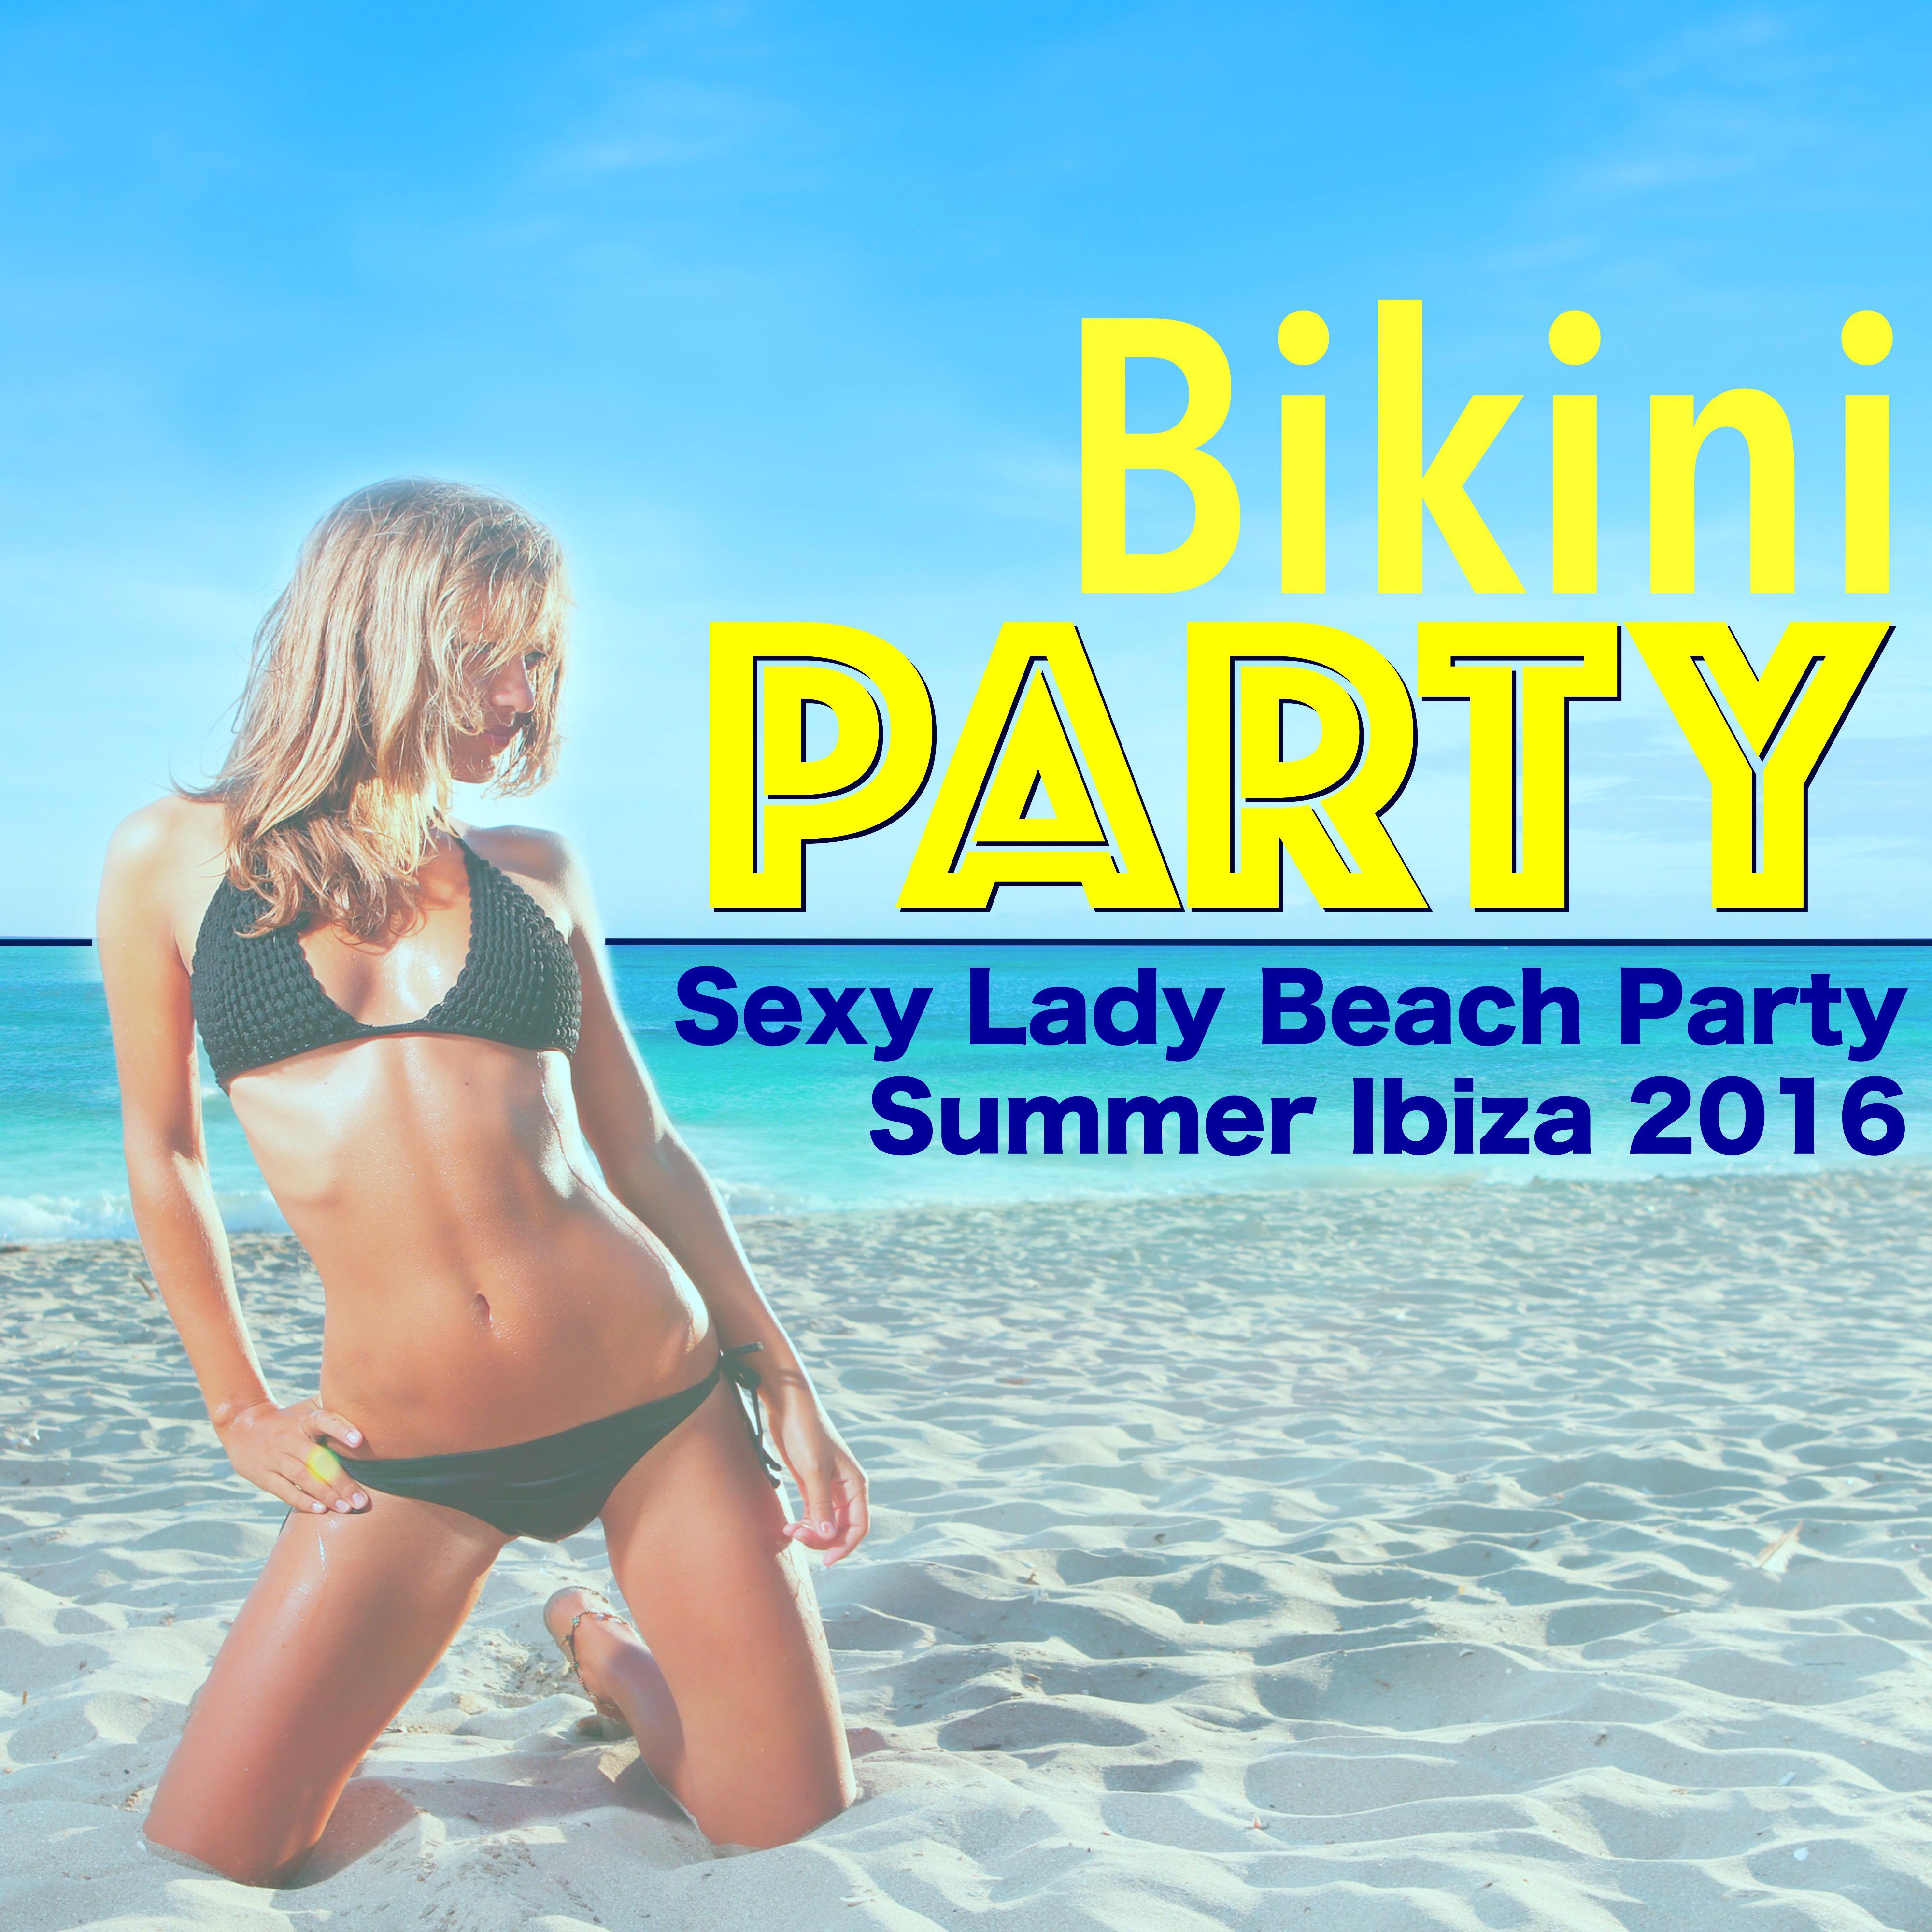 Bikini Party - Best of Chillout, House & Latin Music for **** Lady Beach Party Summer Ibiza 2016